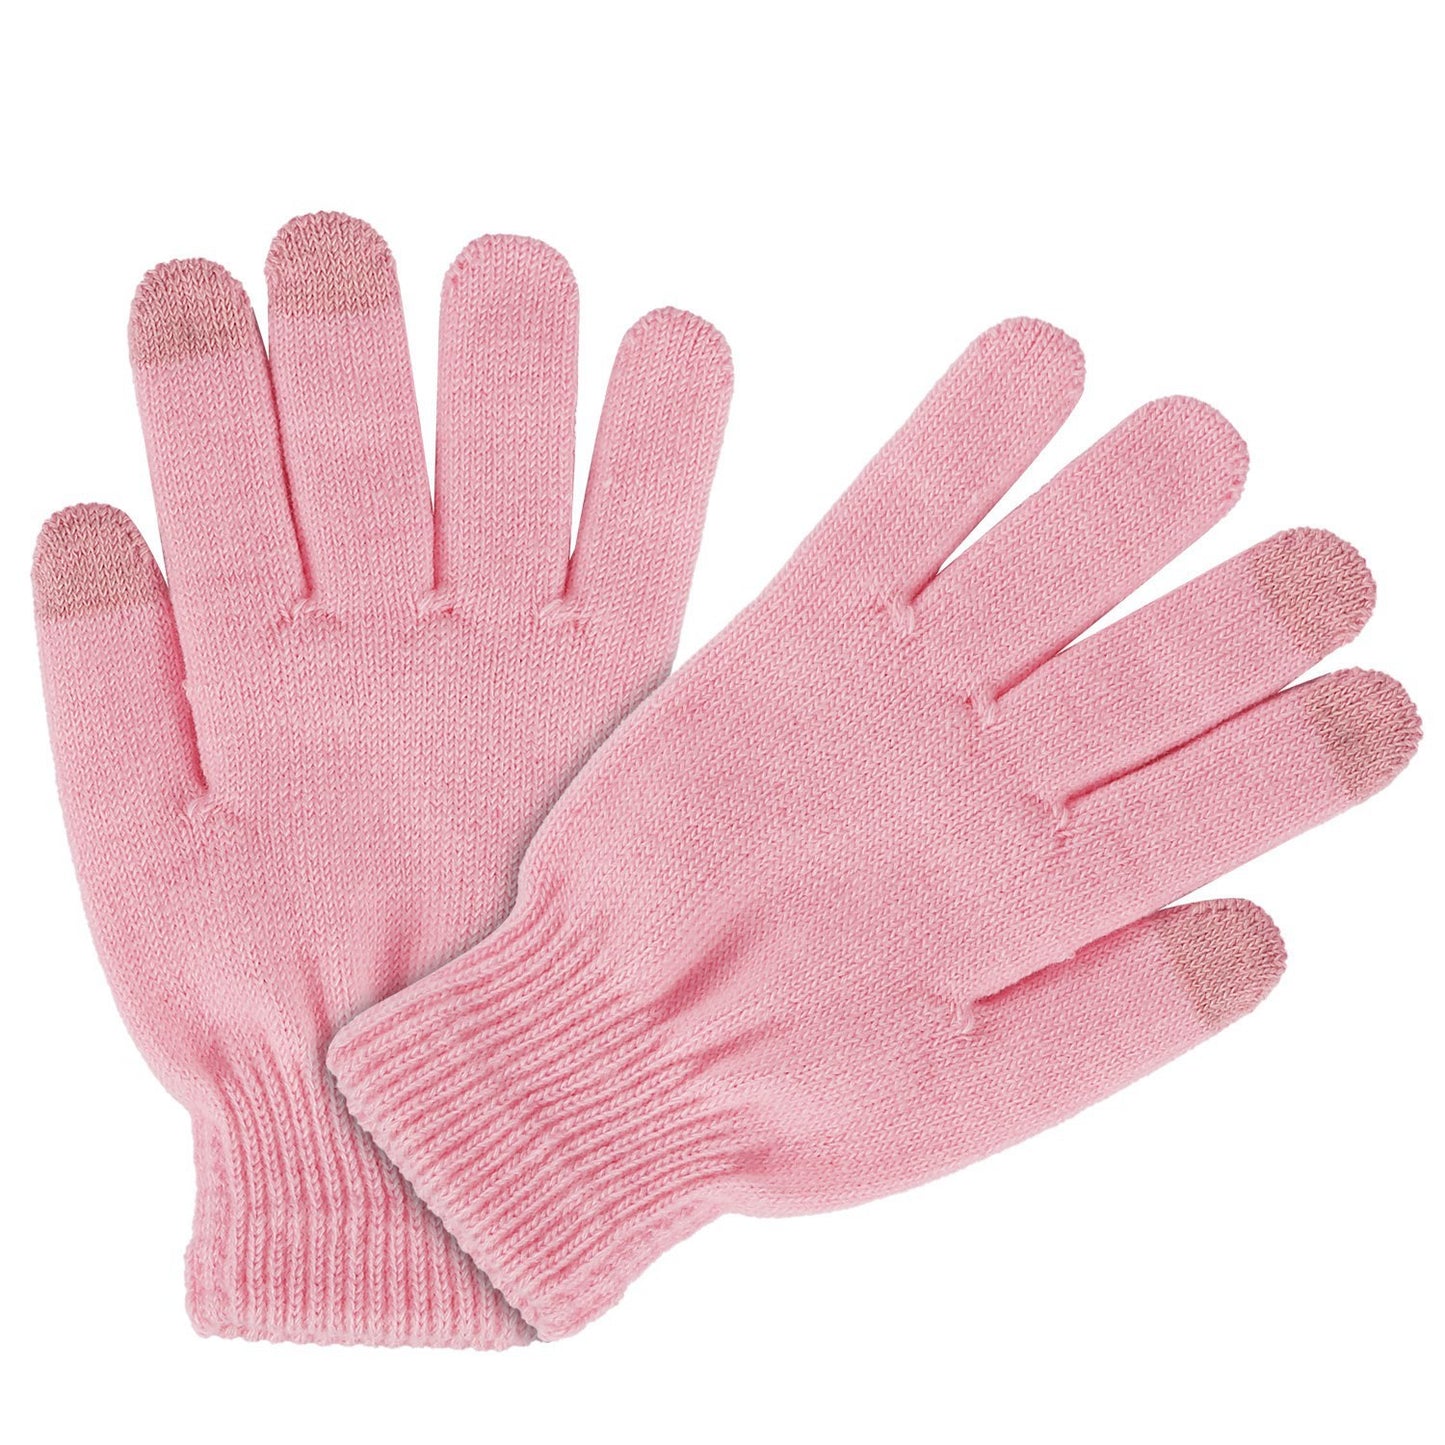 Unisex Winter Knit Gloves Touchscreen Outdoor Windproof Cycling Skiing Warm Gloves